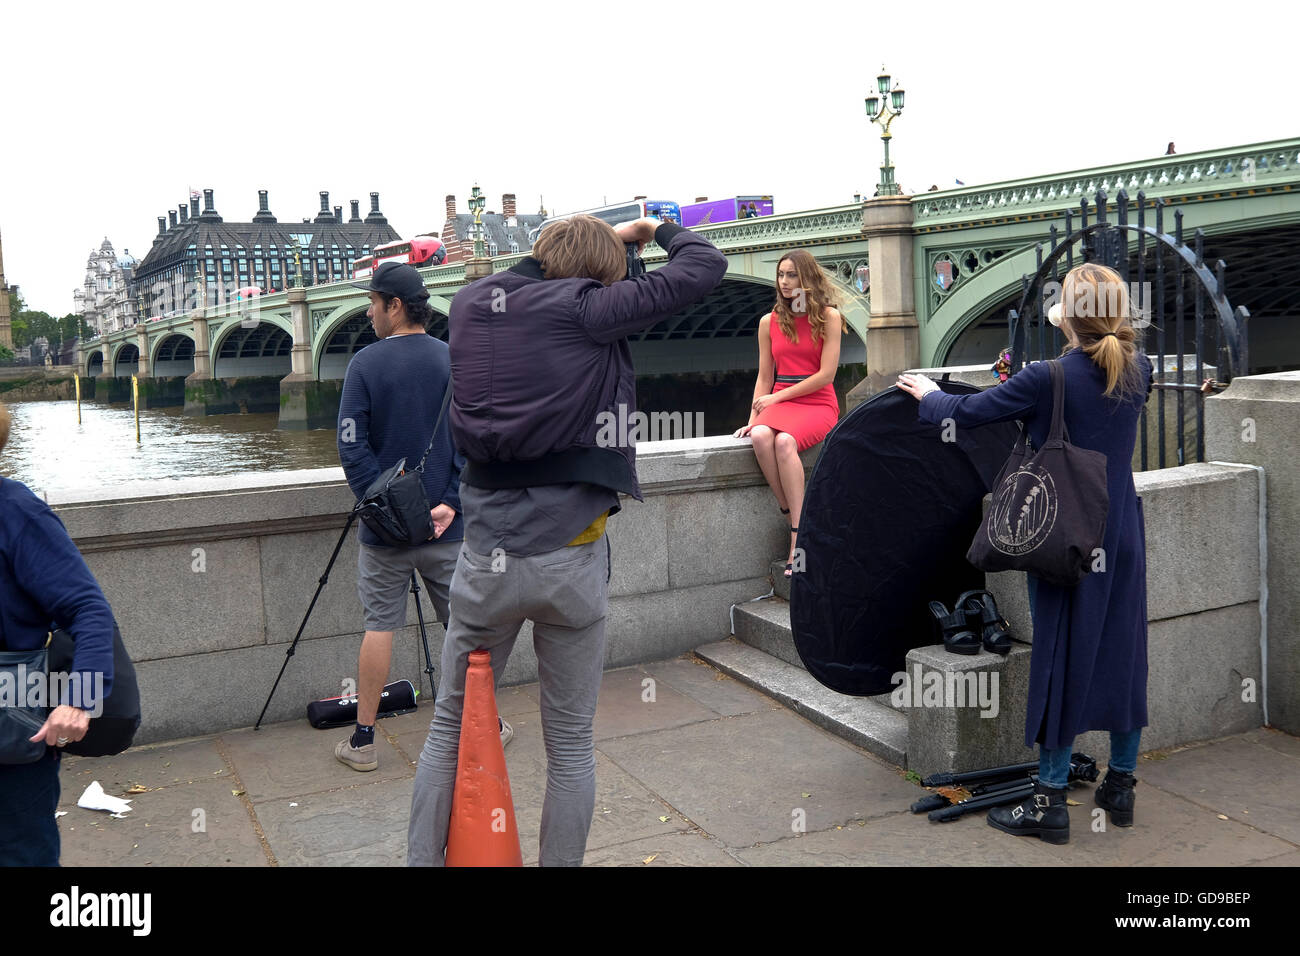 A photographer doing a fashion shoot with Westminster Bridge a London landmark in the background Stock Photo